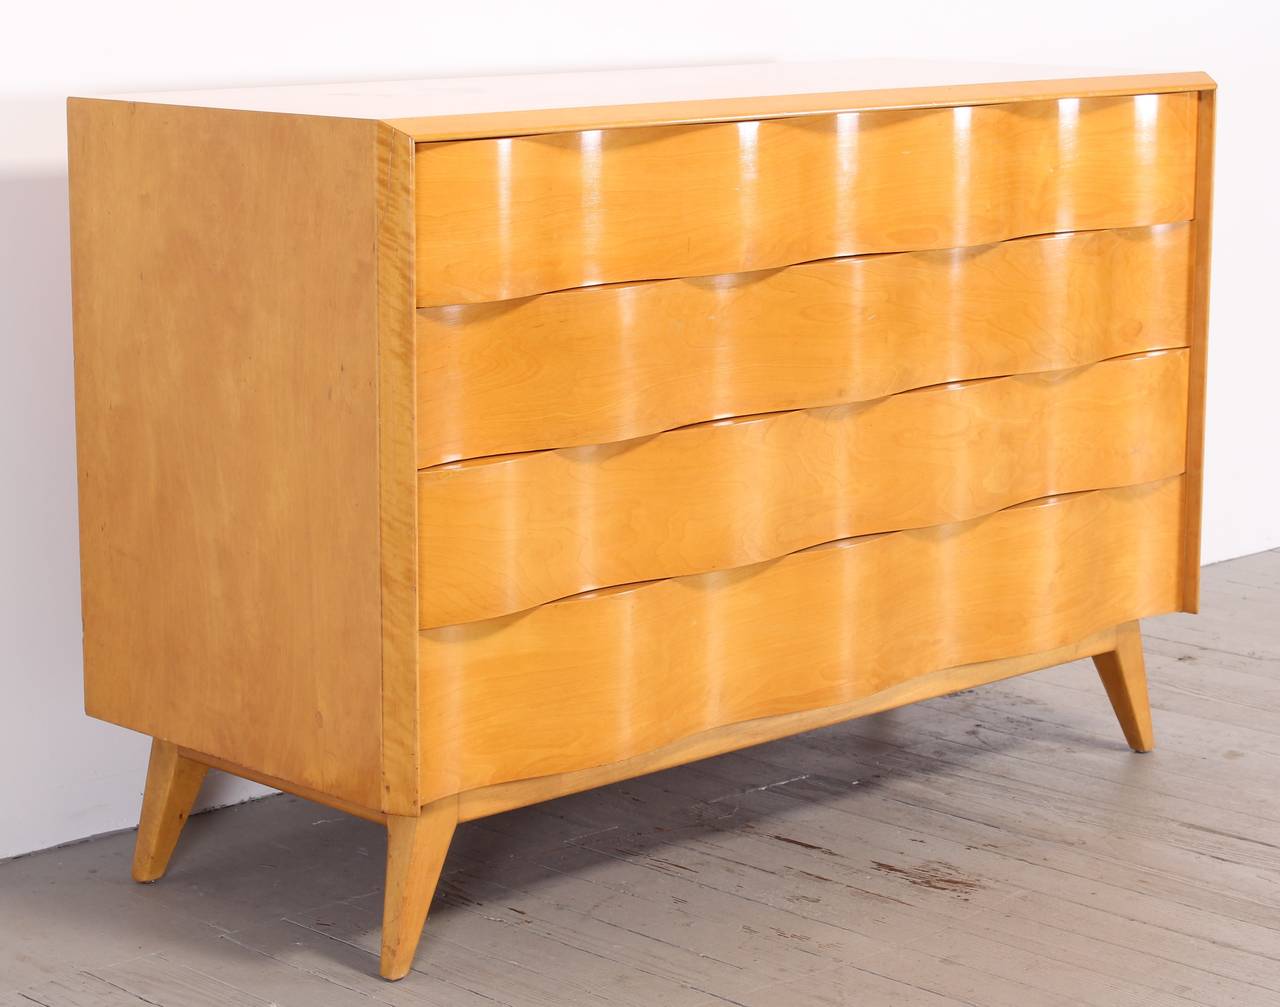 A beautiful wave front design chest by Edmond Spence, Sweden, 1950. New York City Delivery would be $249.00.